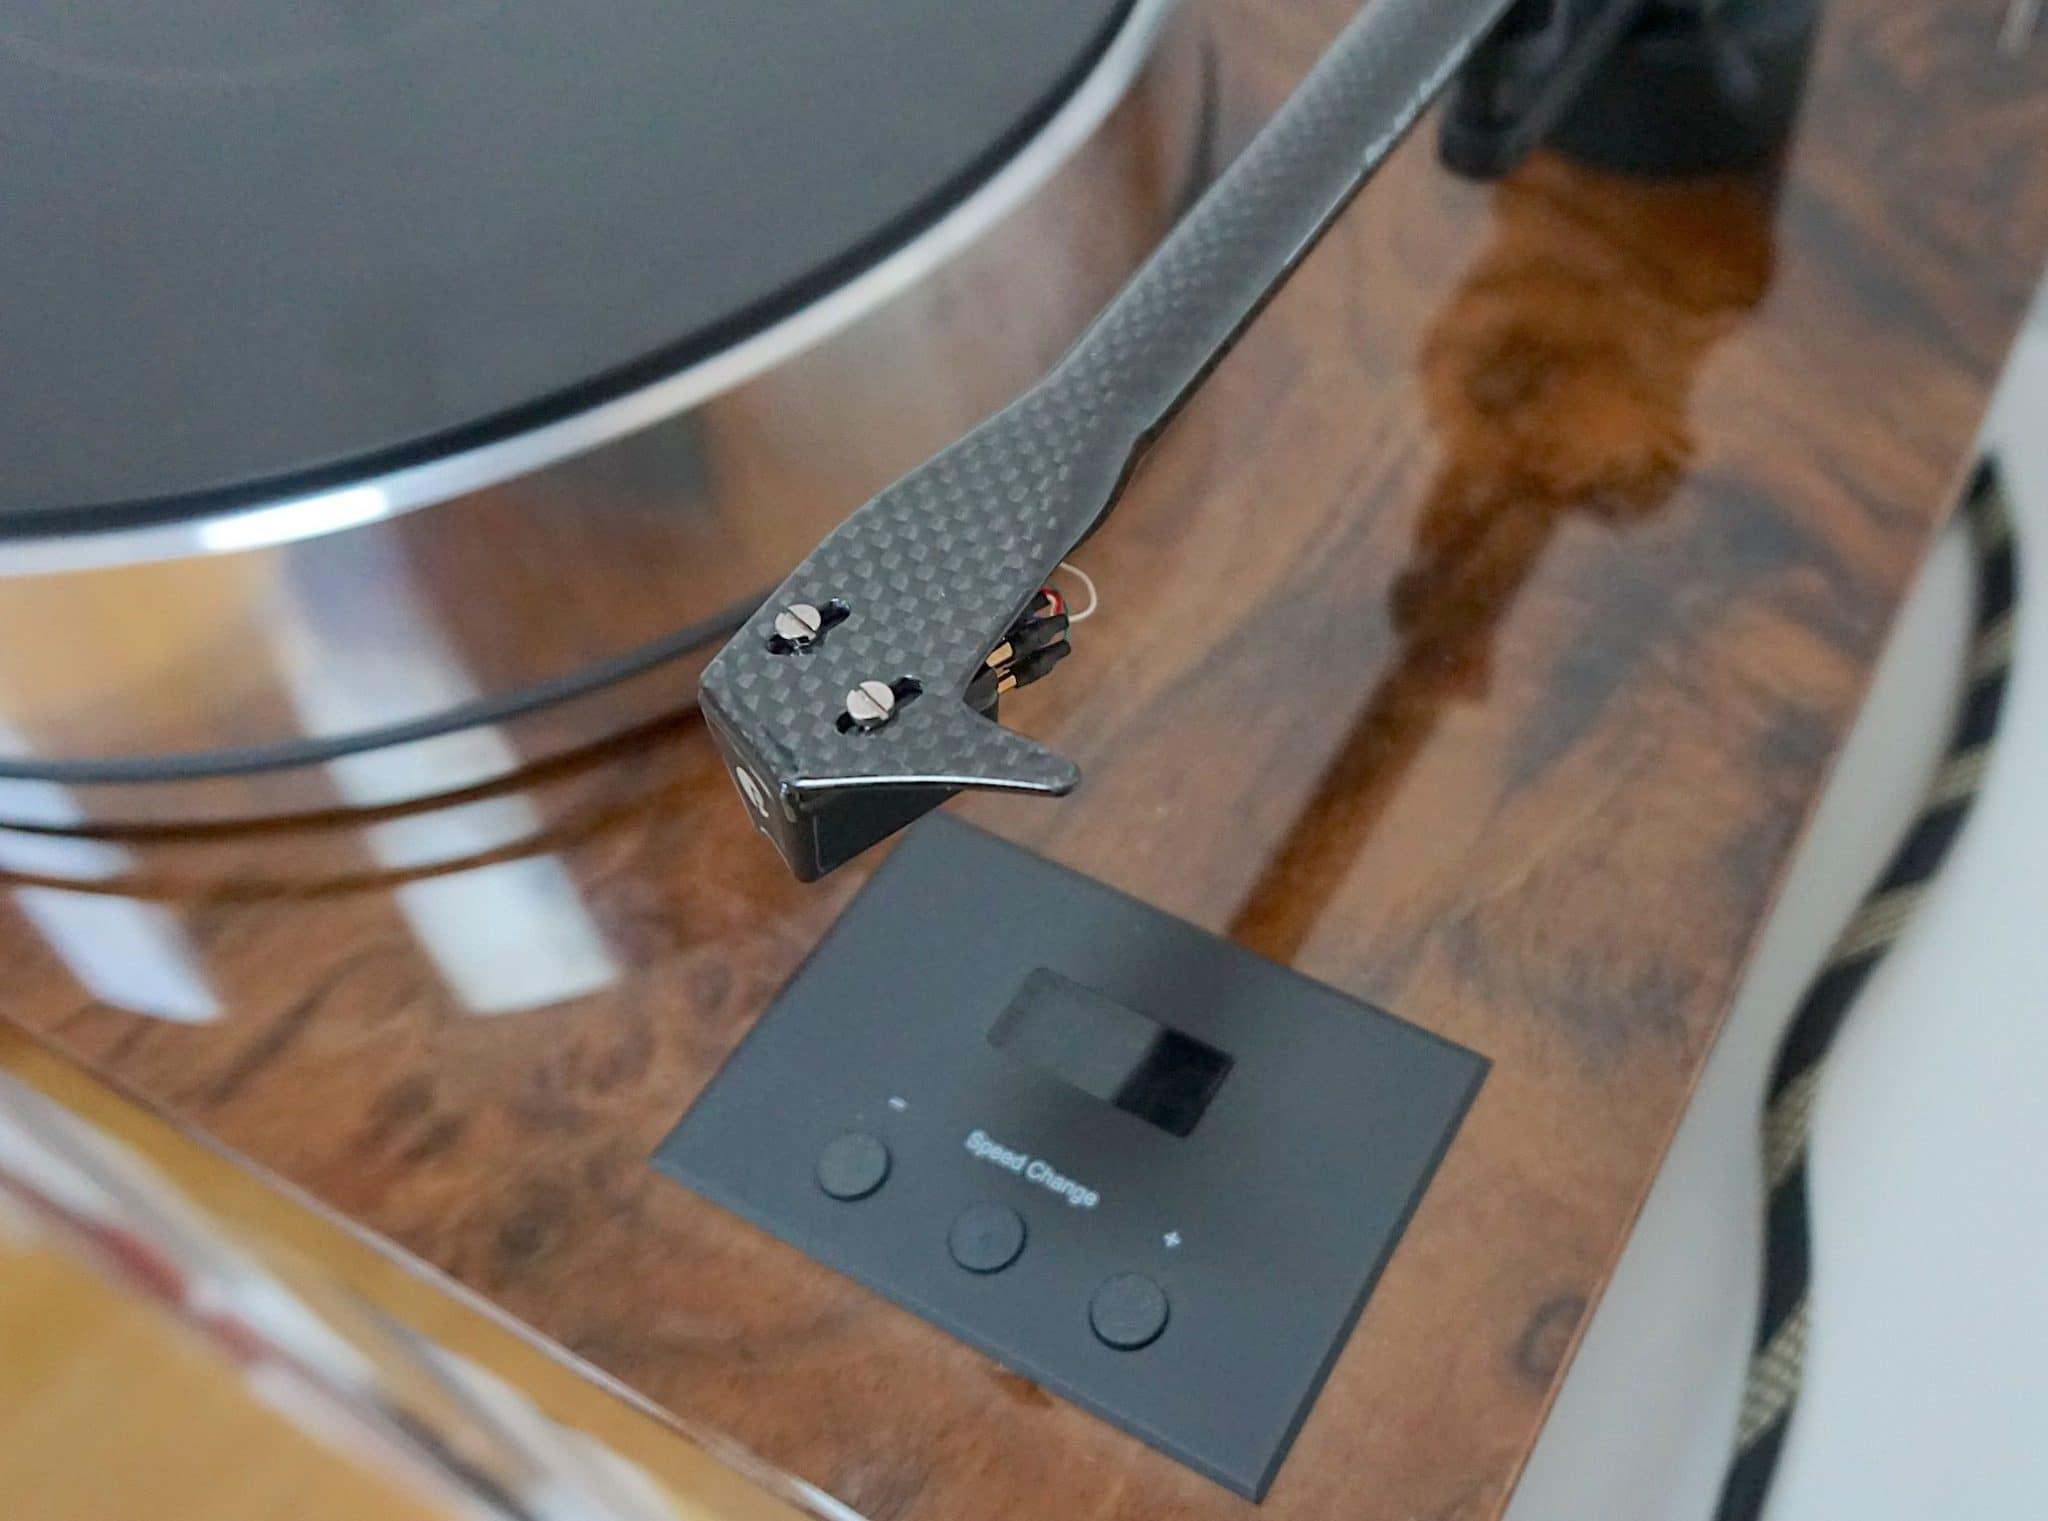 Xtension 10 Turntable From Pro-Ject